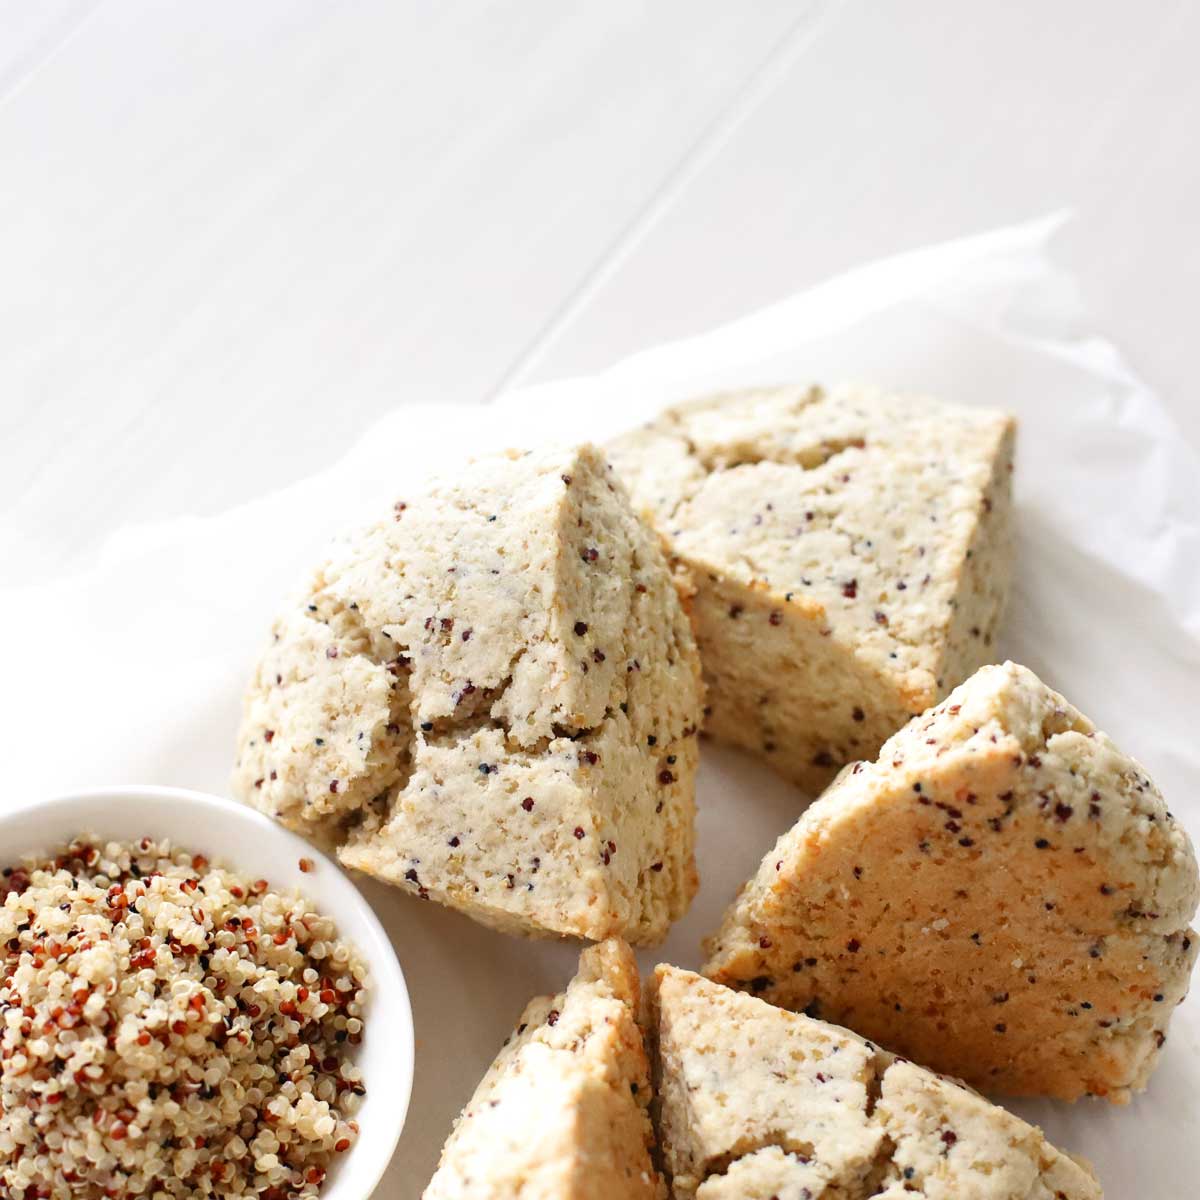 Nutty and Wholesome: Quinoa Scones for a Healthy, Vegan Twist - Vegan Strawberry Scones